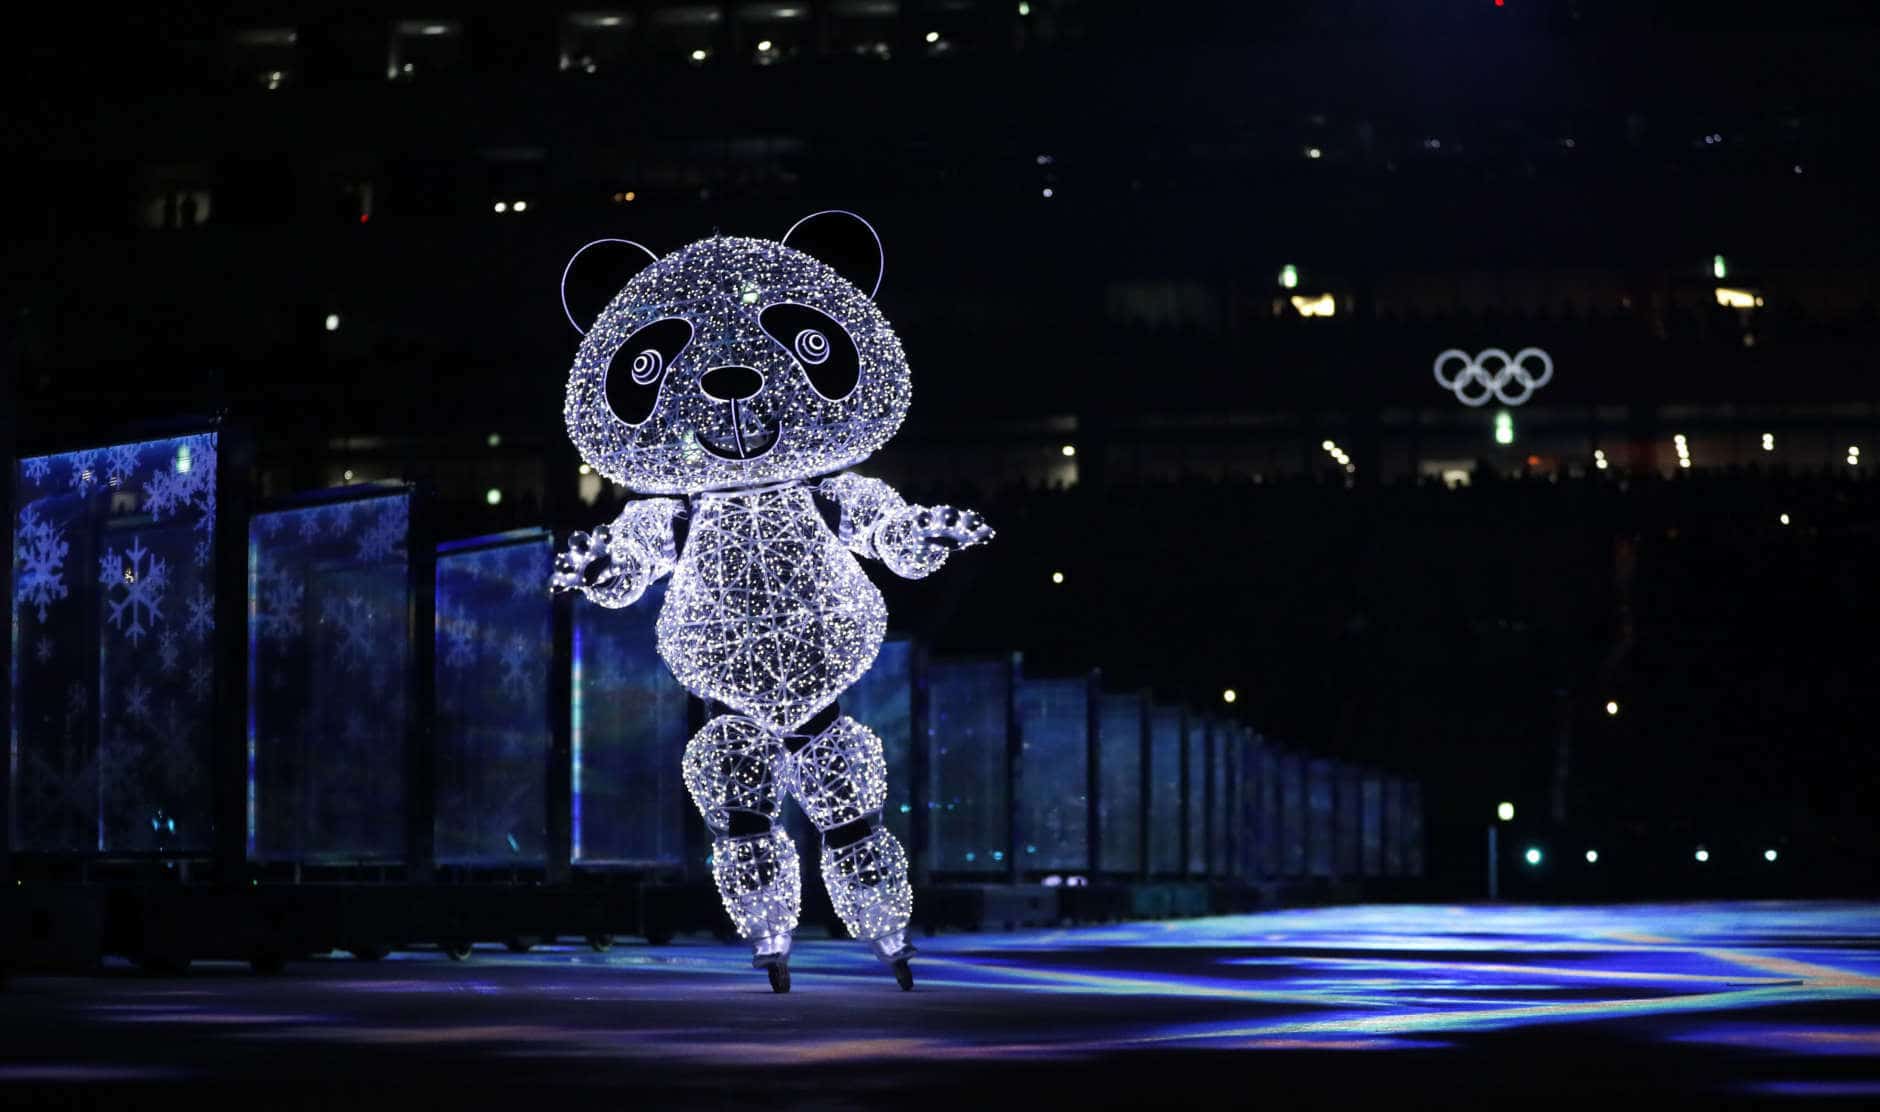 A performer participates during the closing ceremony of the 2018 Winter Olympics in Pyeongchang, South Korea, Sunday, Feb. 25, 2018. (AP Photo/Kirsty Wigglesworth)